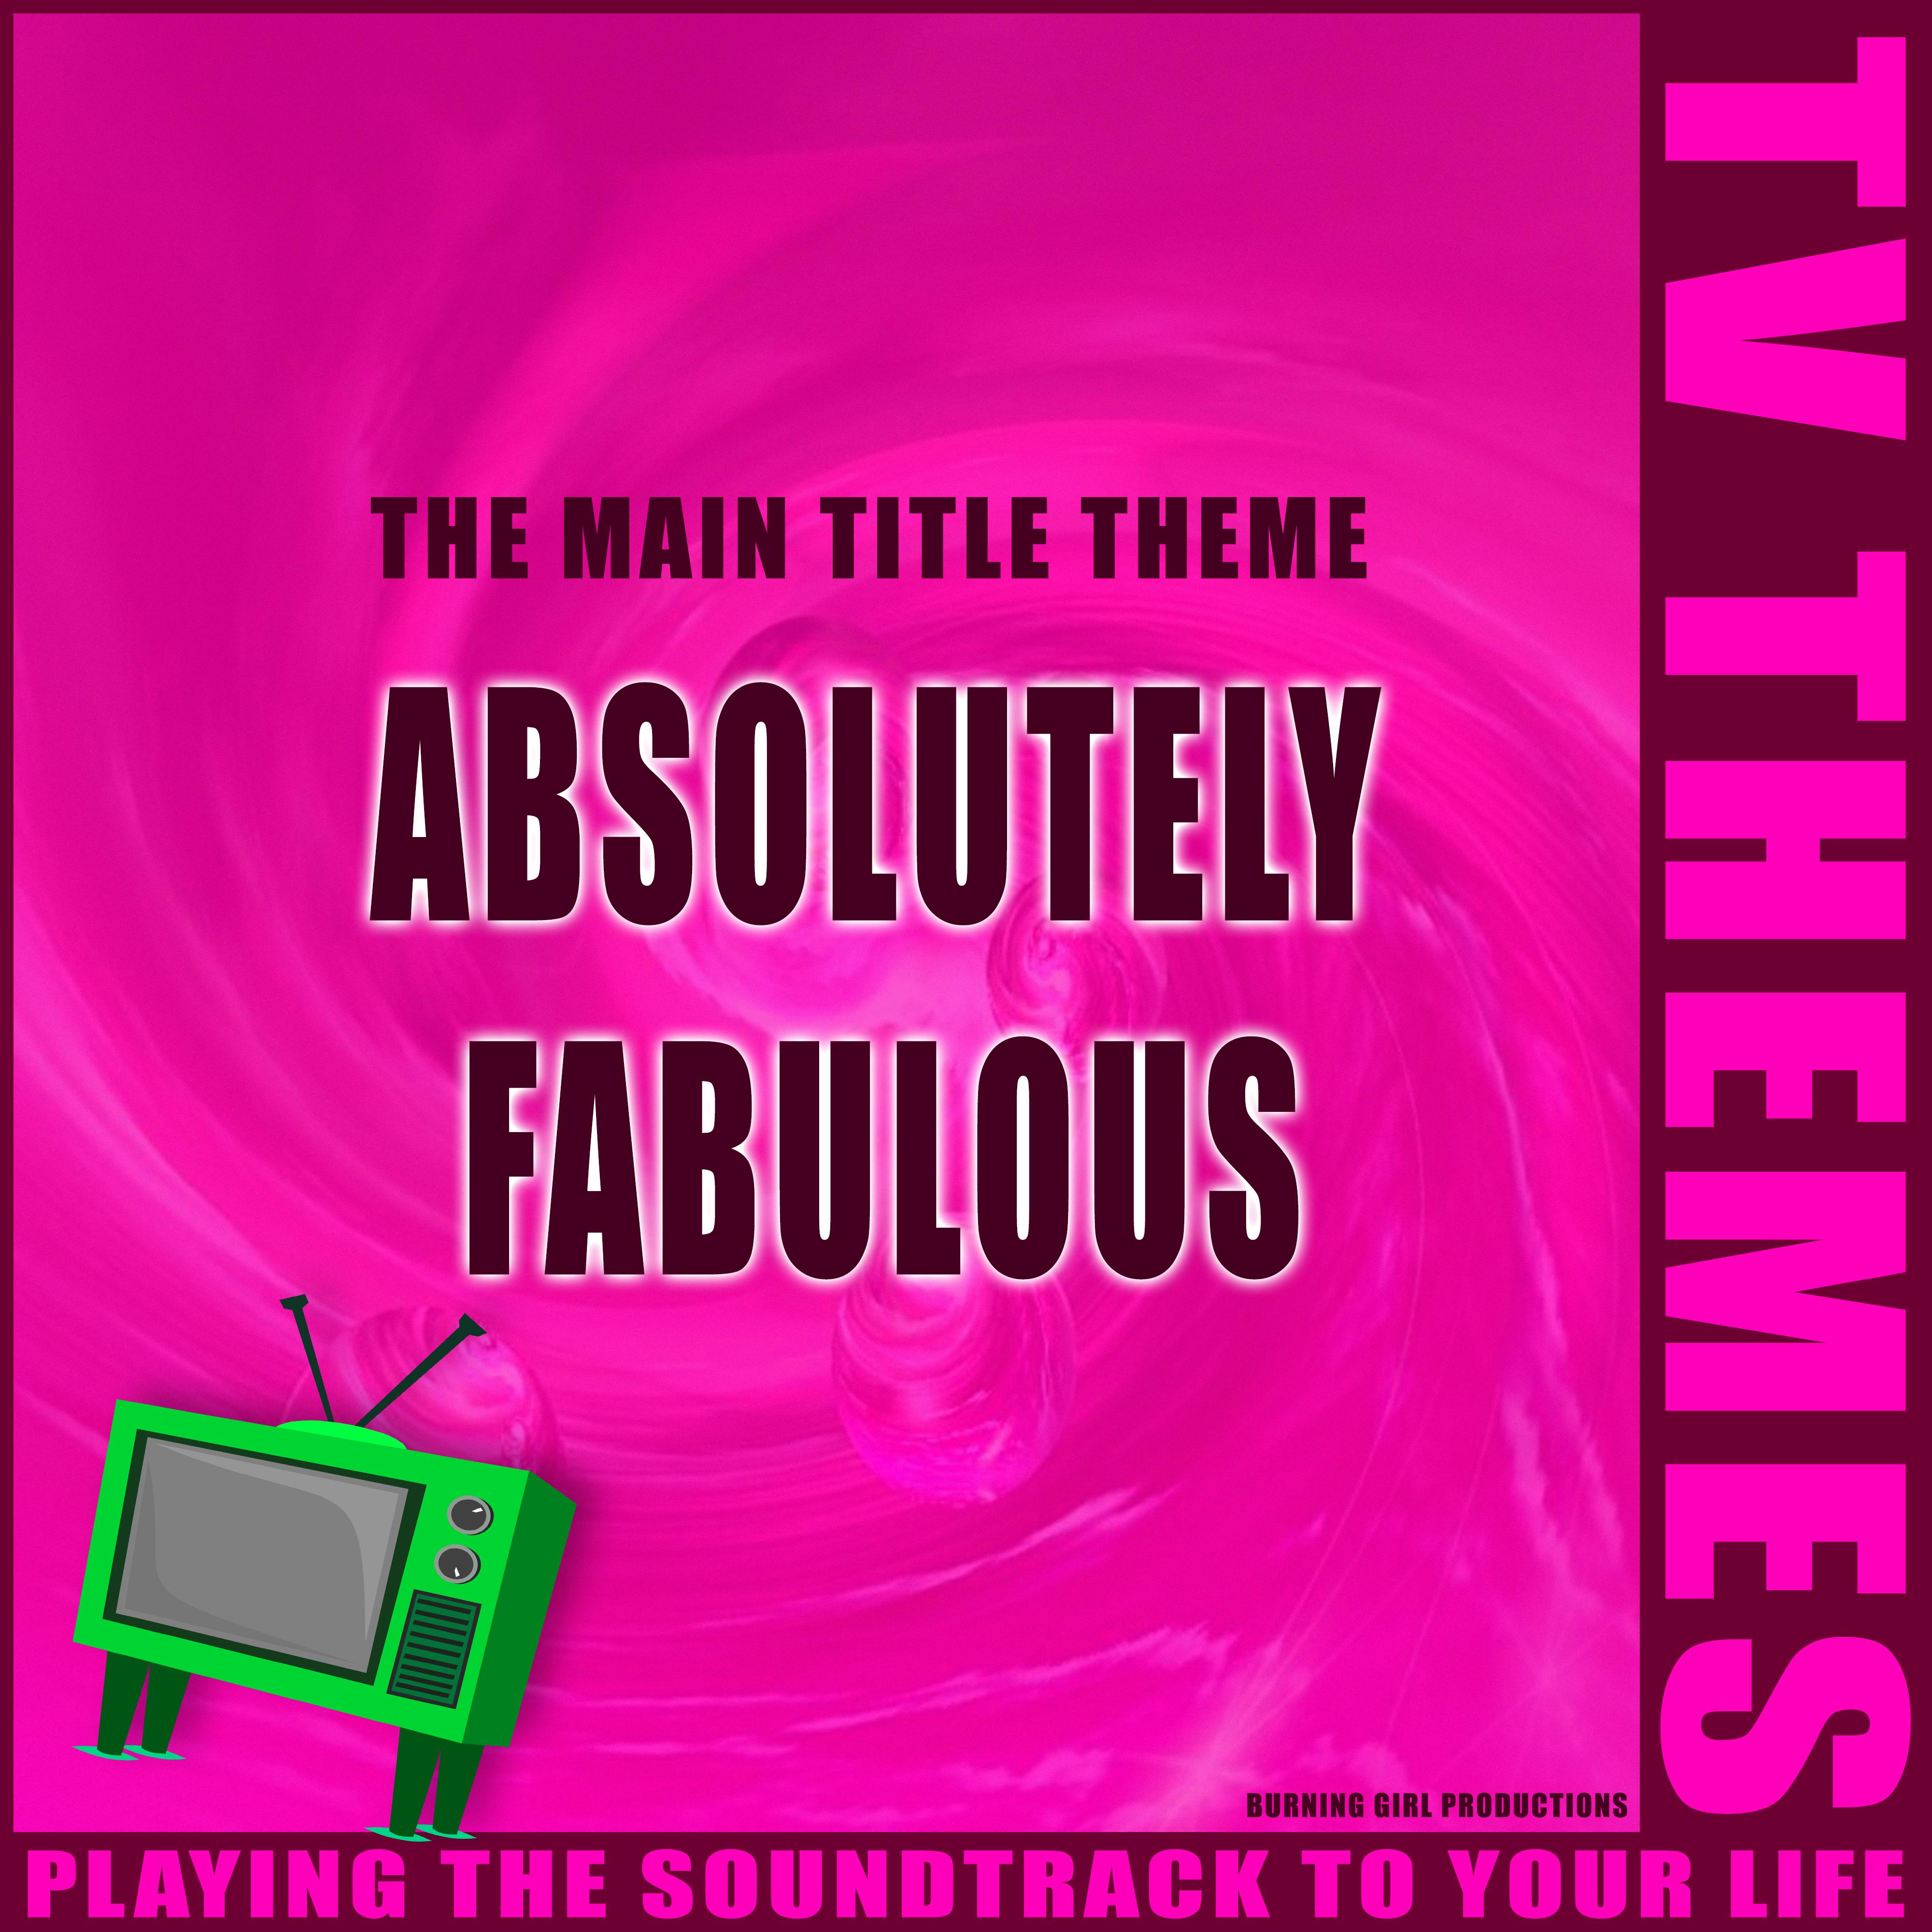 The Main Title Theme - Absolutely Fabulous